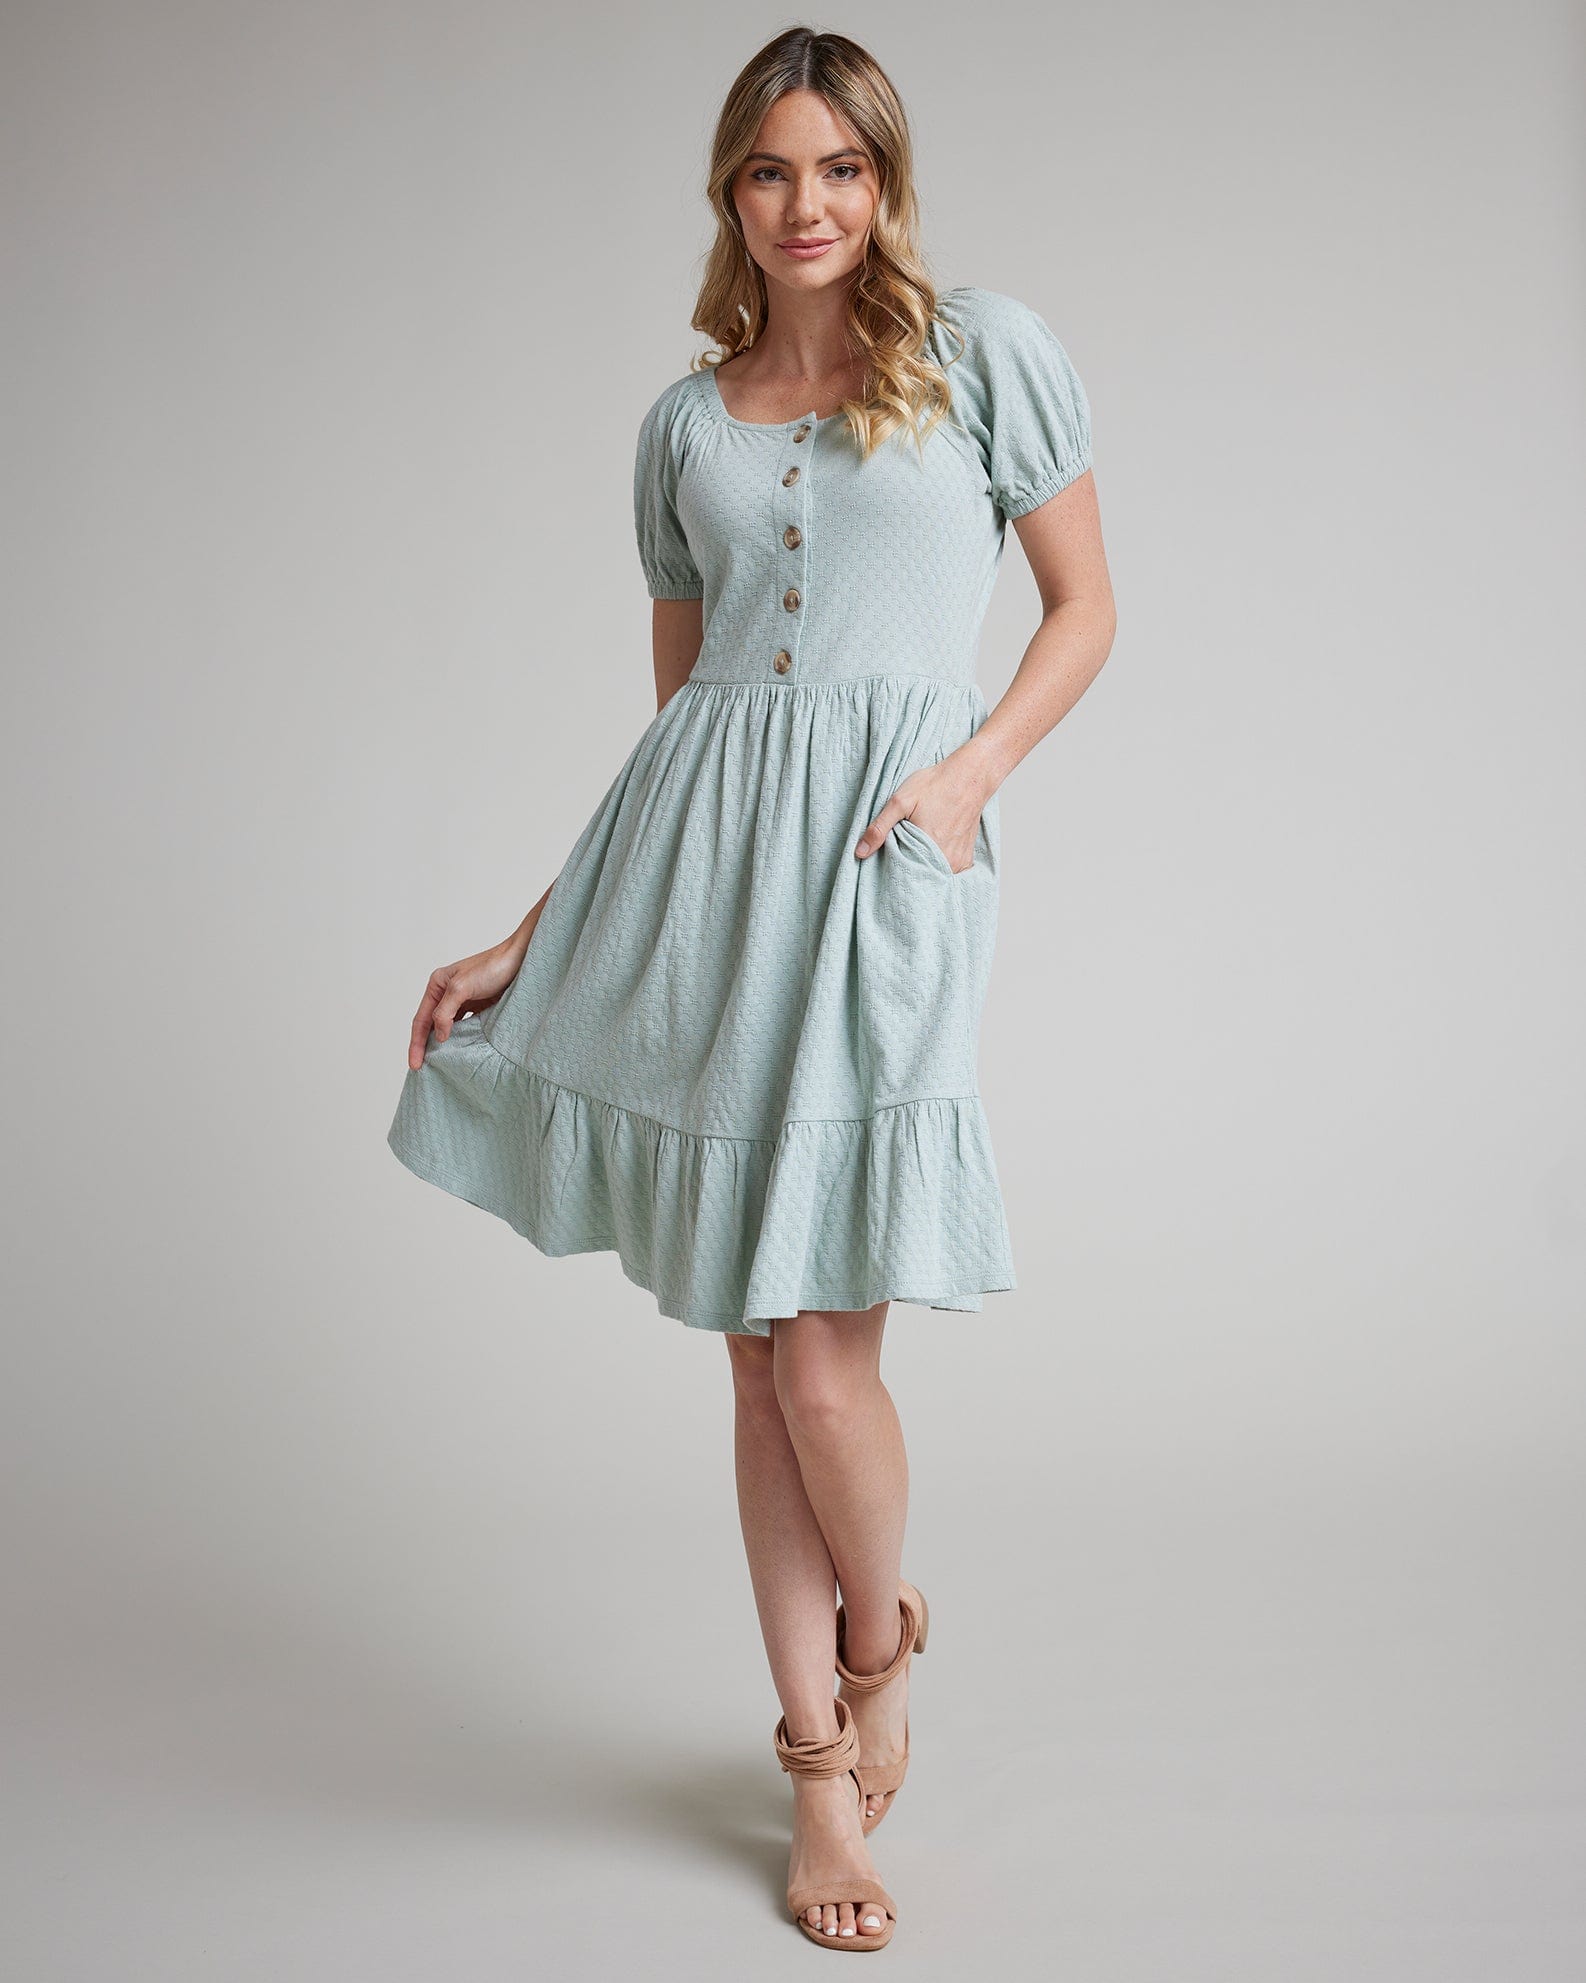 Woman in a short sleeve, square neck, blue dress with buttons down the front